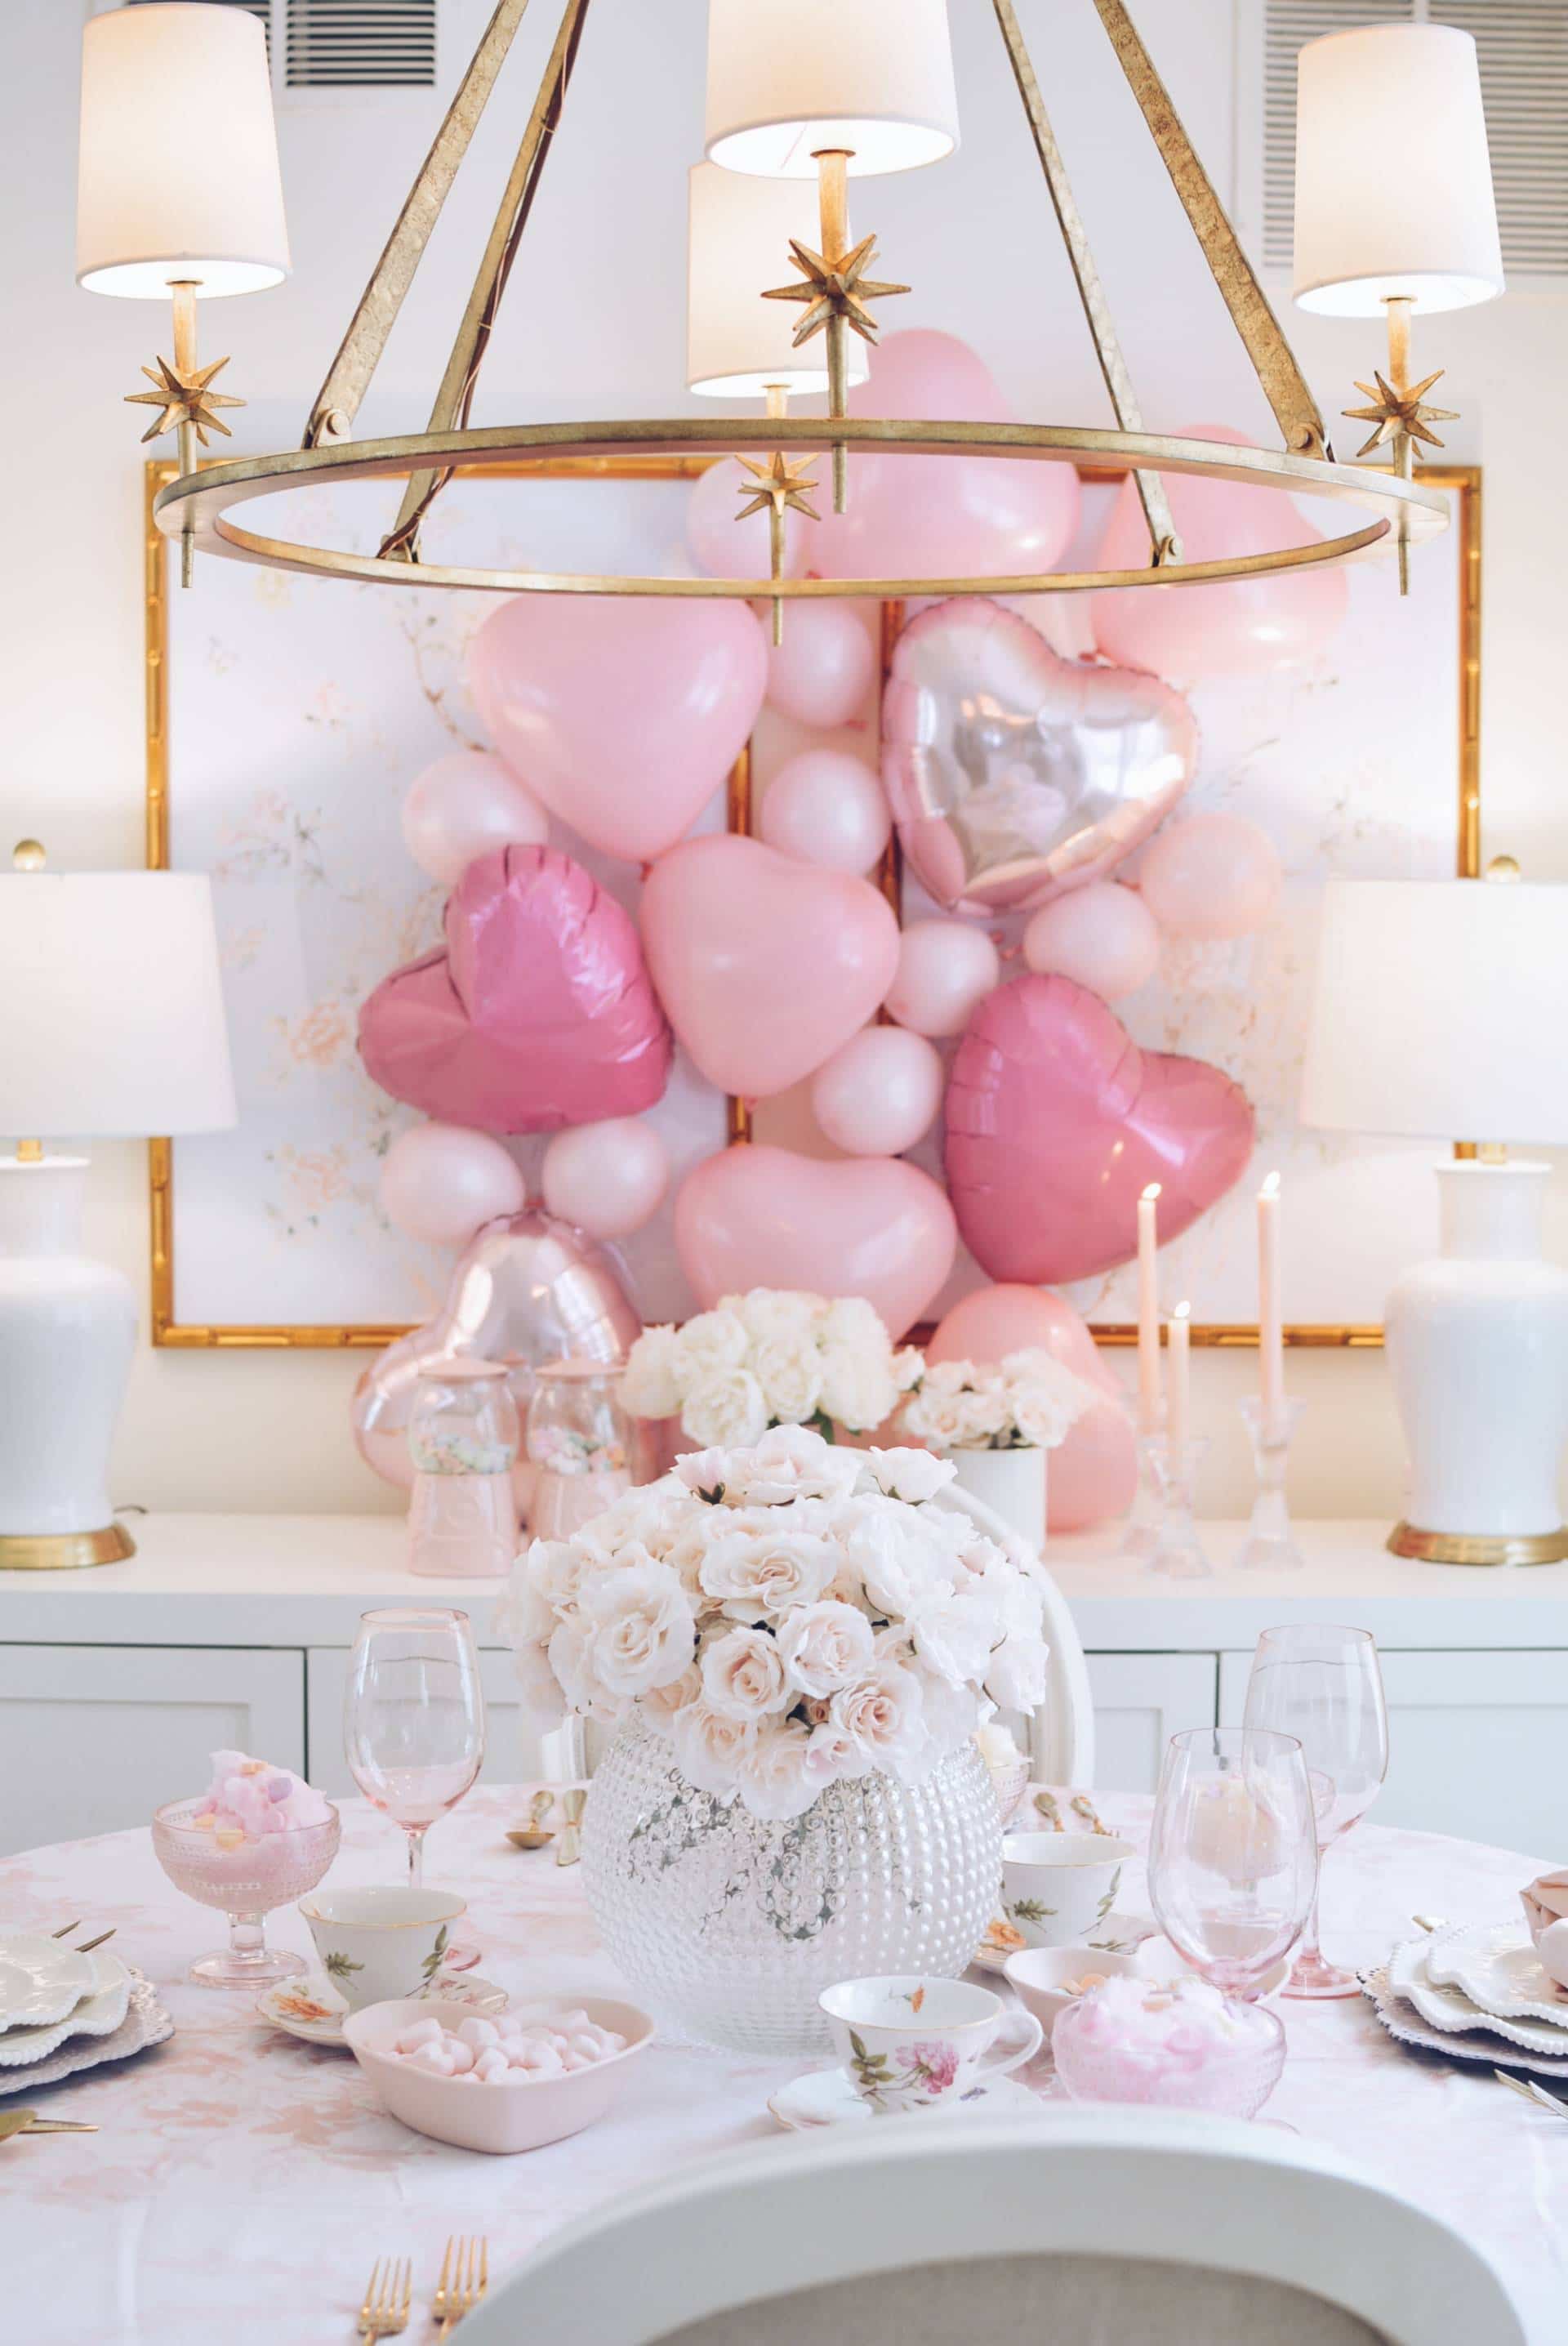 Woman in Real Life: Valentine's Day Pink and Gold Table Decor with